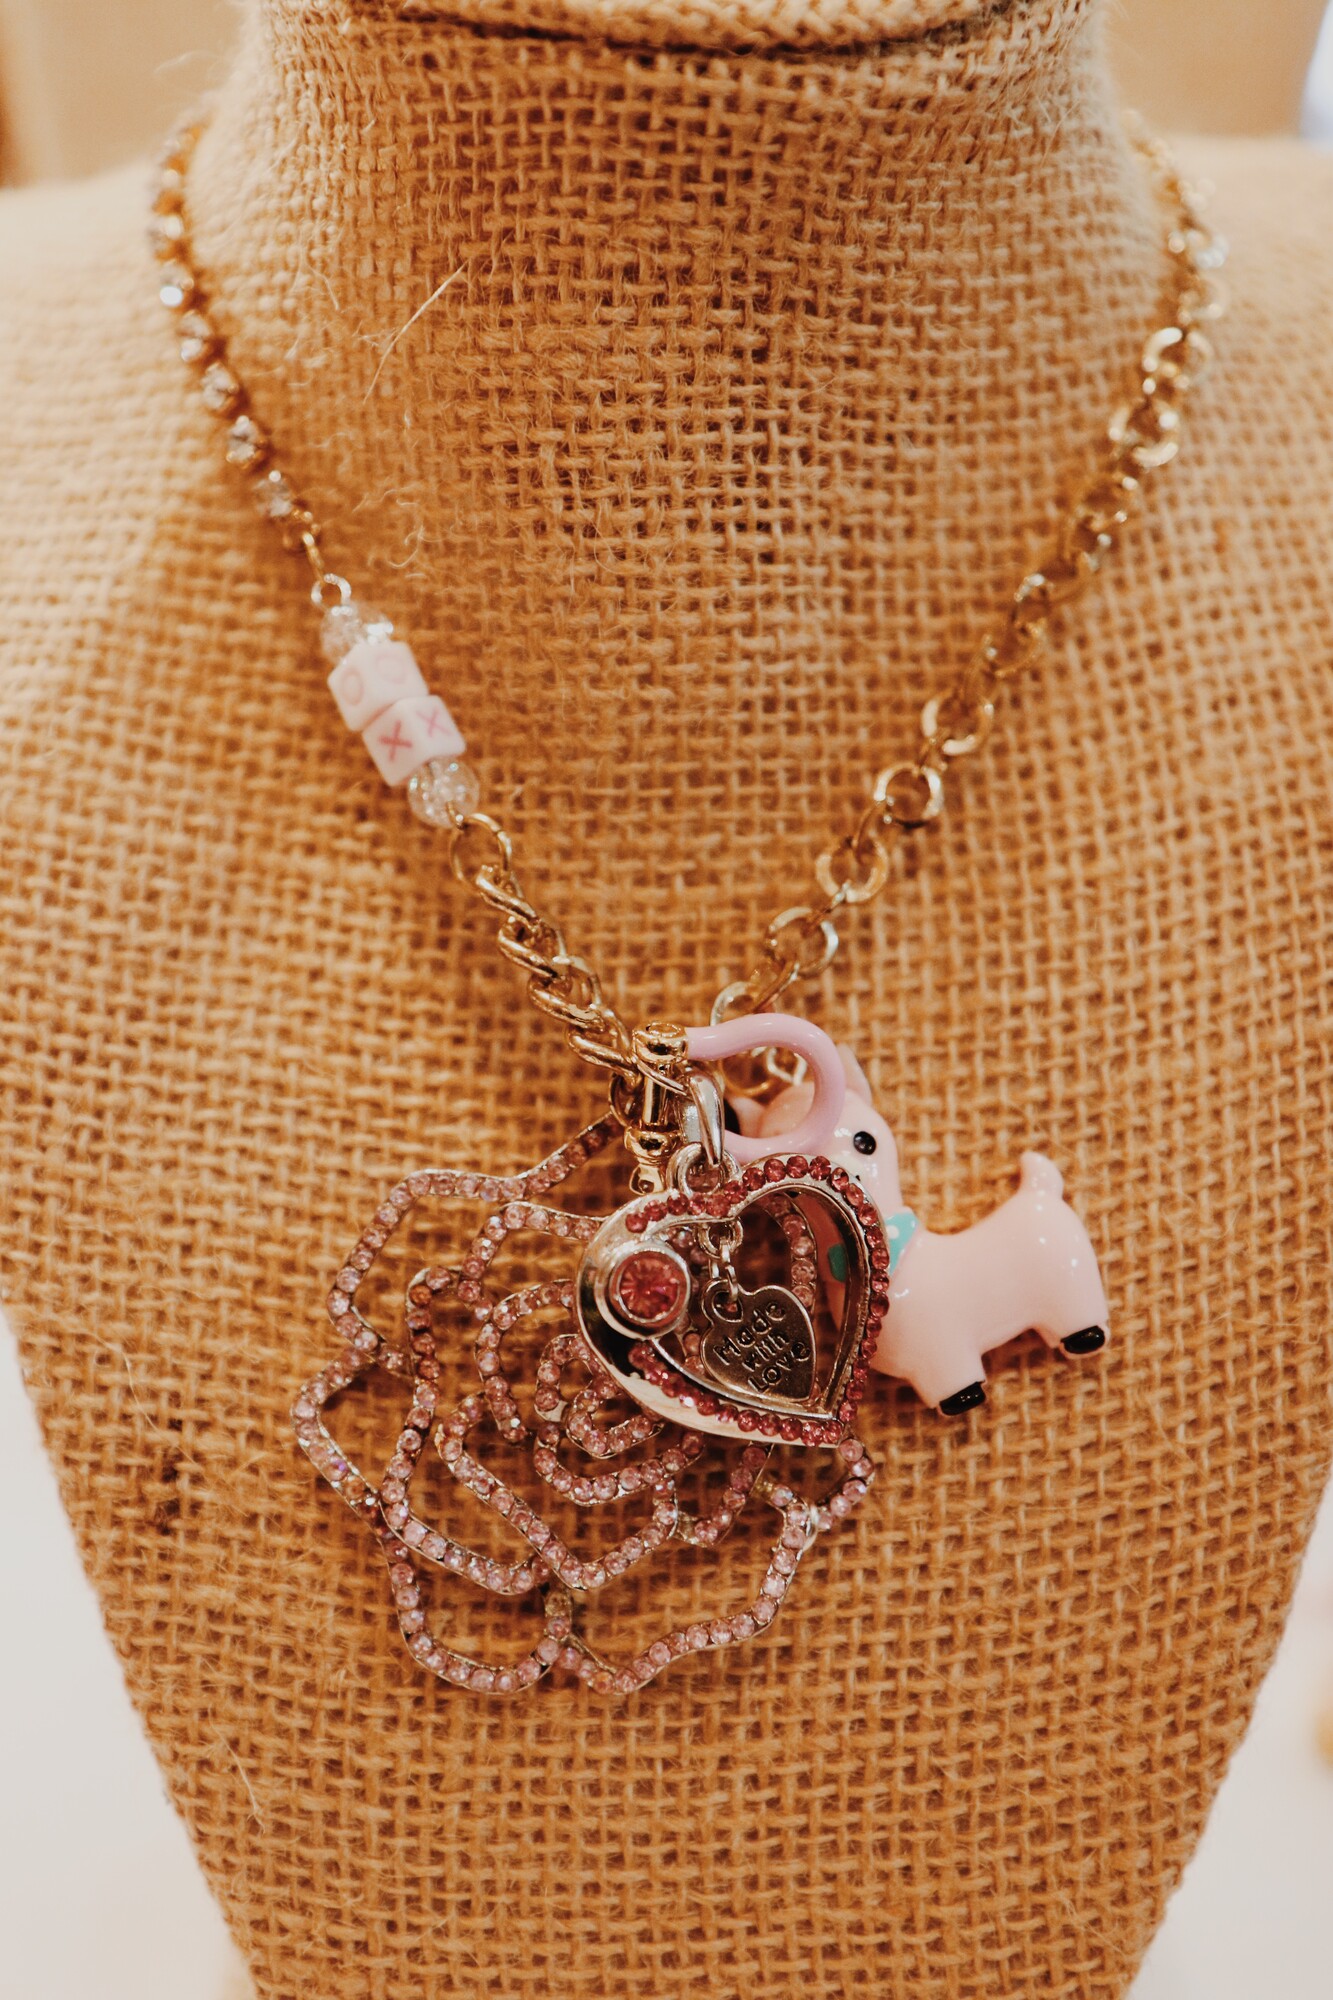 This handmade necklace by Kelli Hawk Designs is on a 20 inch mix matched chain with an XO on it! The centerpiece is a mix of charms that include a vintage flower, a pink llama, and a pink heart.